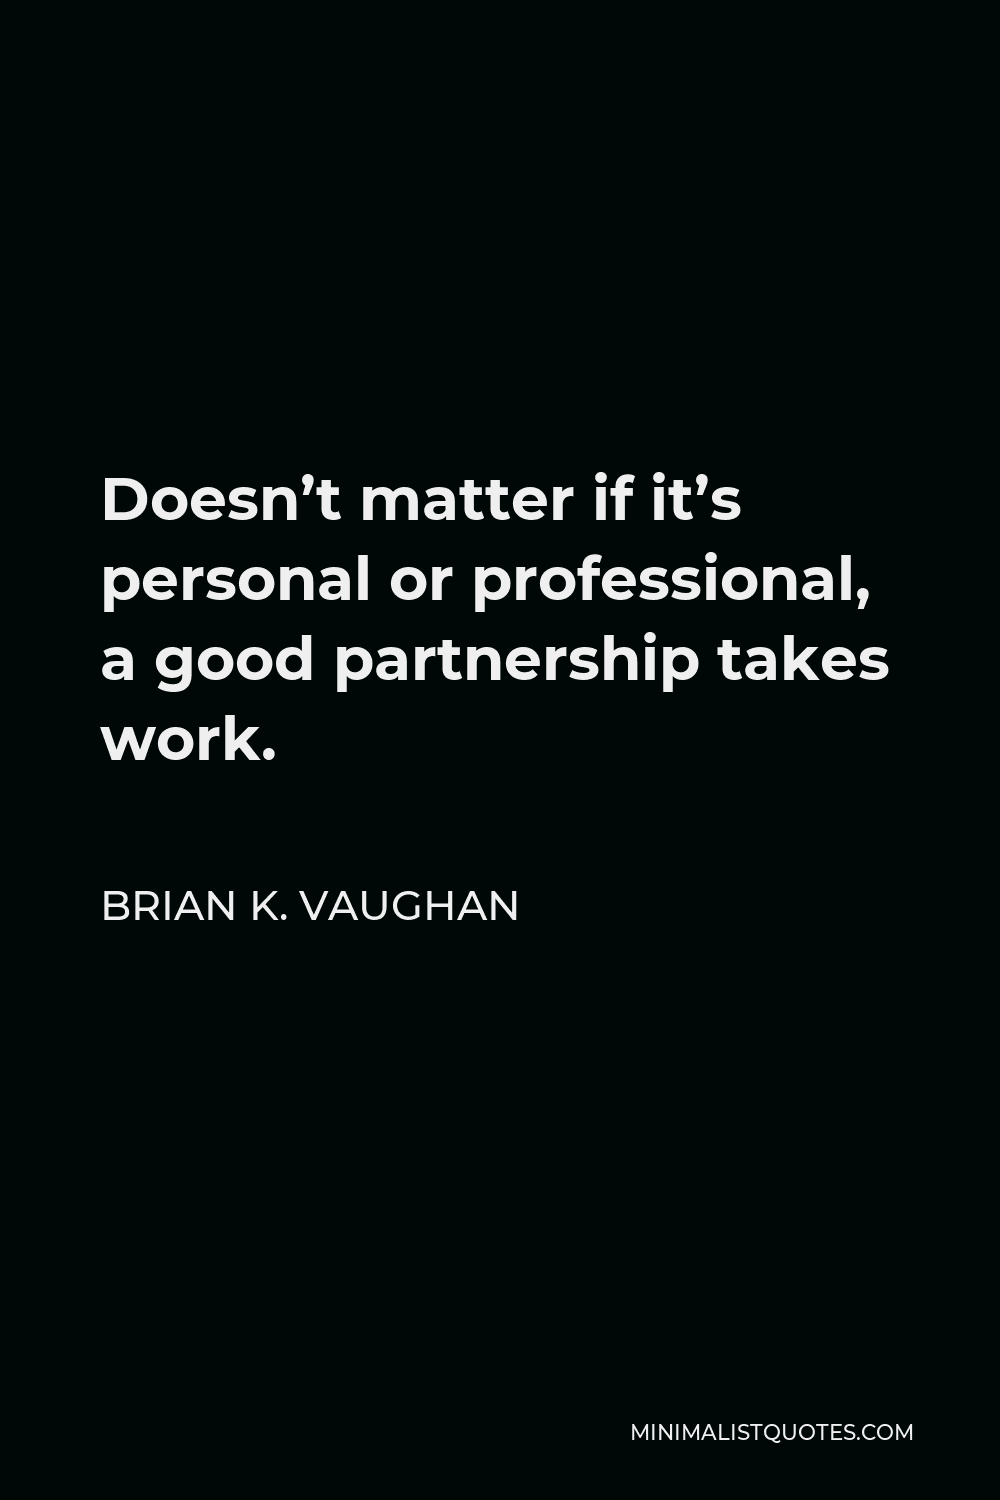 Brian K. Vaughan Quote - Doesn’t matter if it’s personal or professional, a good partnership takes work.